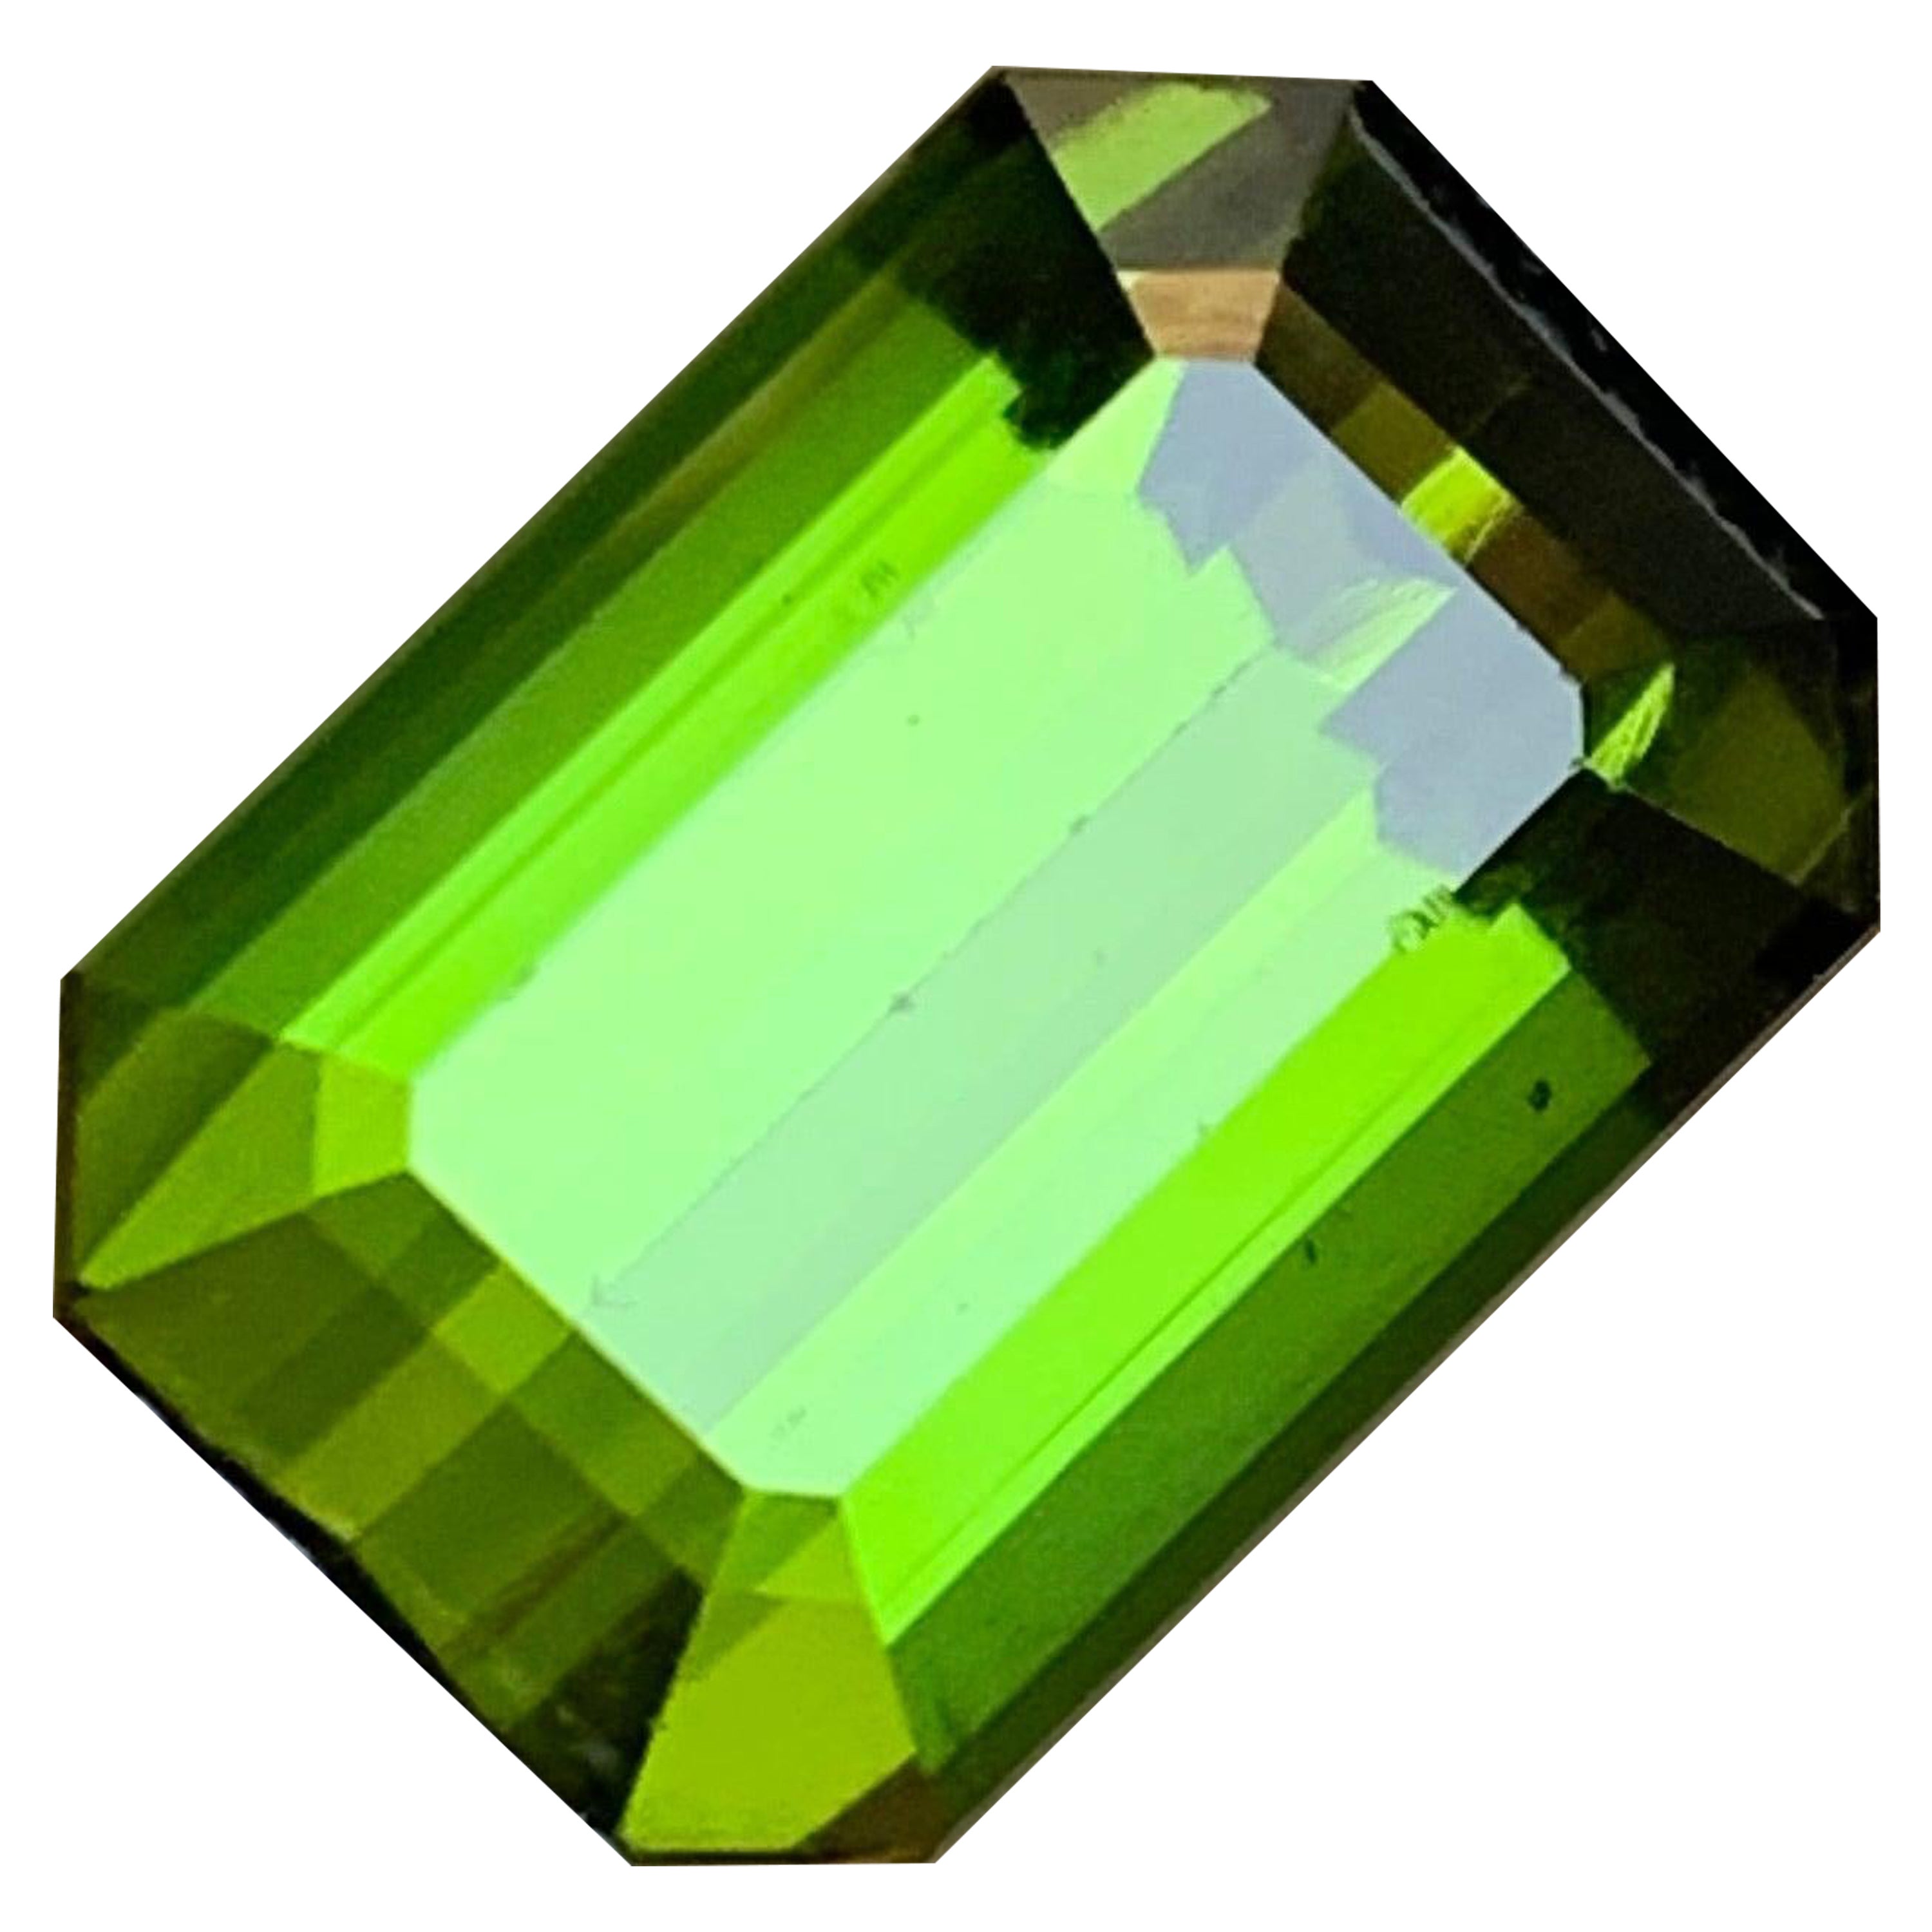 Rare Green Natural Tourmaline Loose Gemstone, 7.75 Ct-Emerald Cut Top Quality For Sale